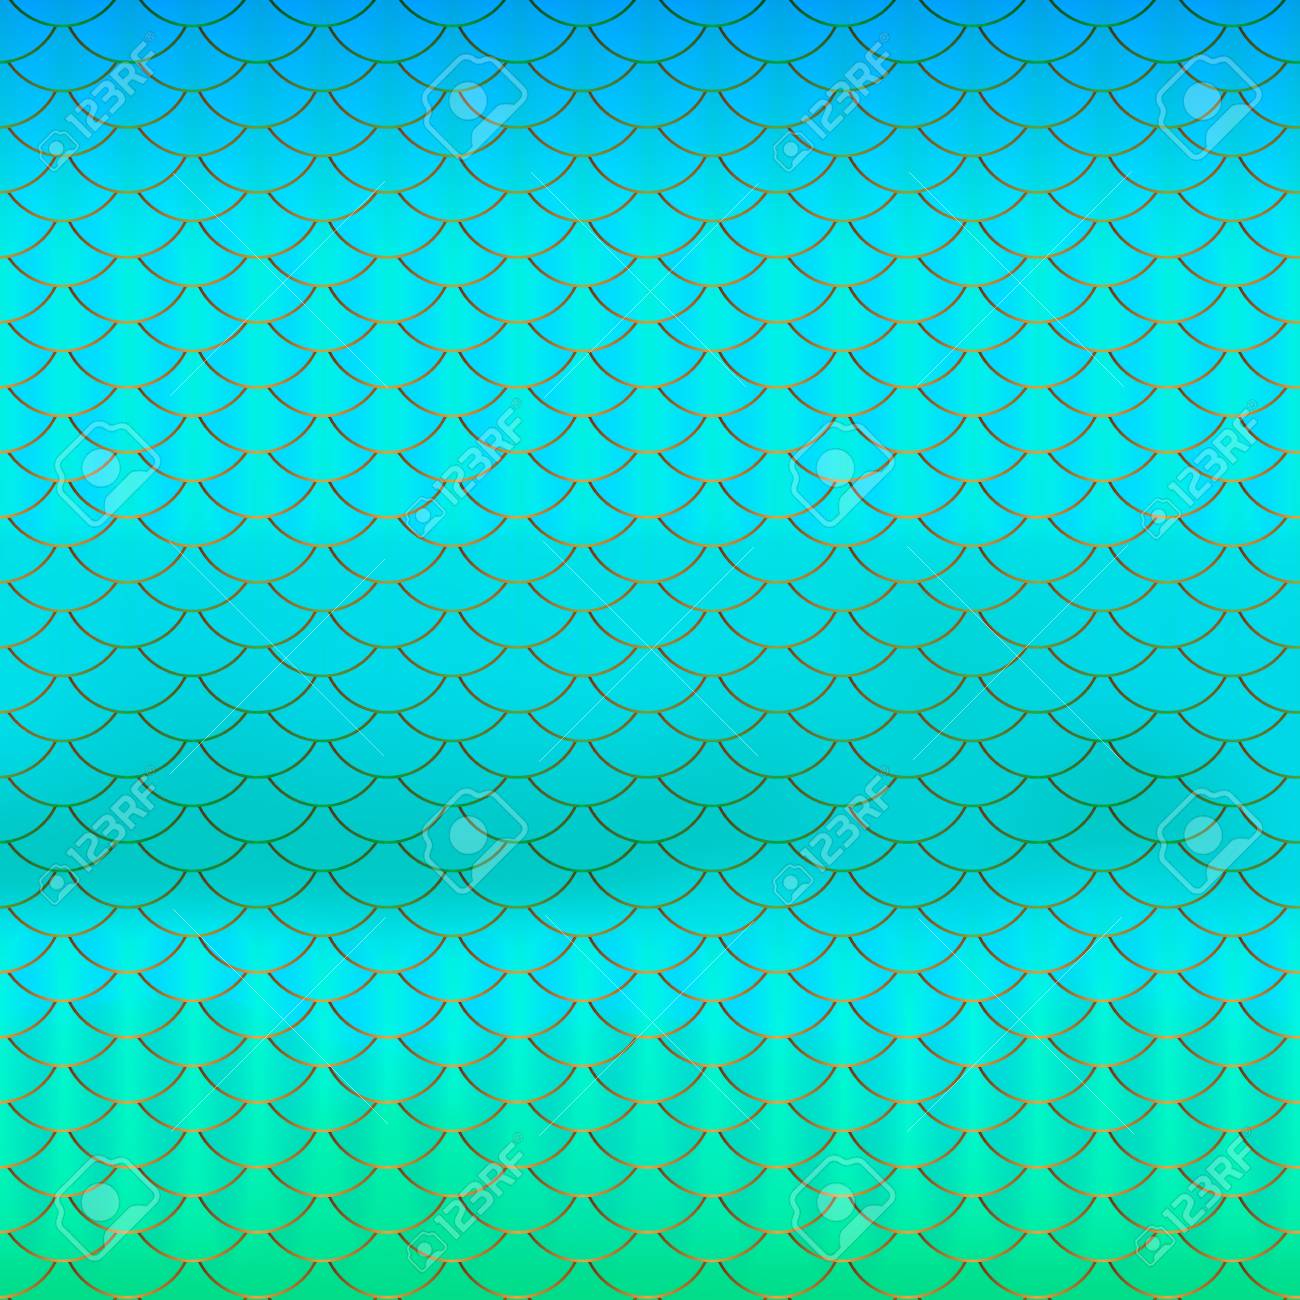 Purple Blue Mint Green And Gold Fish Scale Texture Background